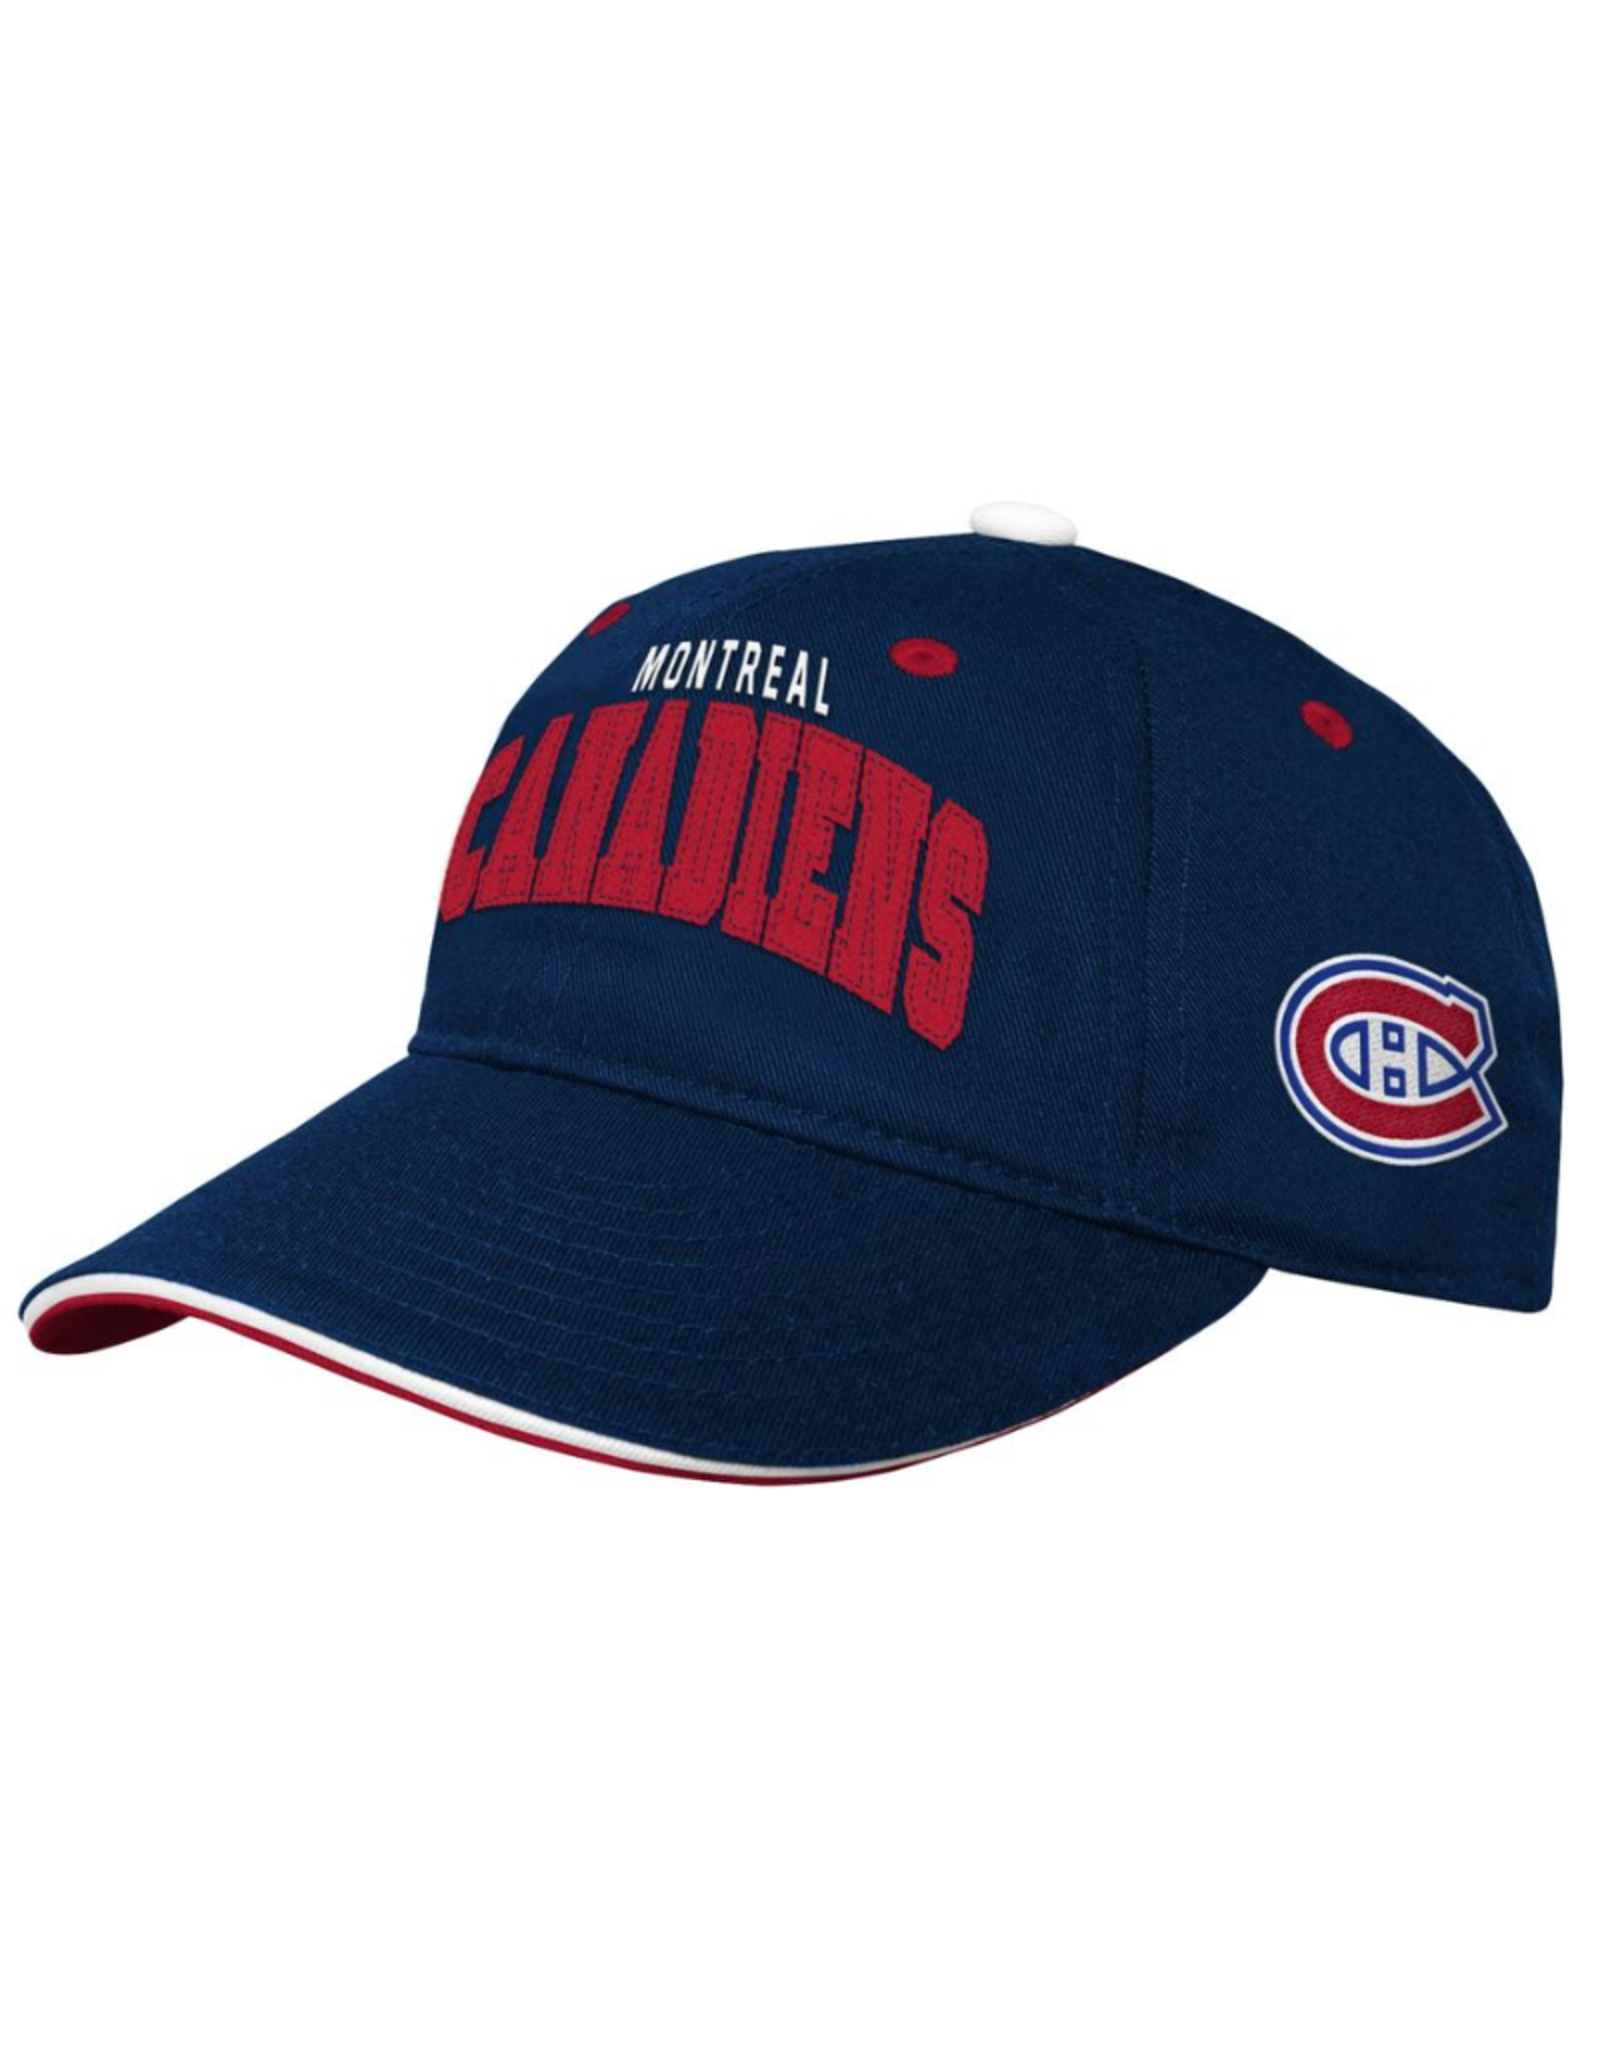 Outerstuff Youth Collegiate Arch Lifestyle Adjustable Hat Montreal Canadiens